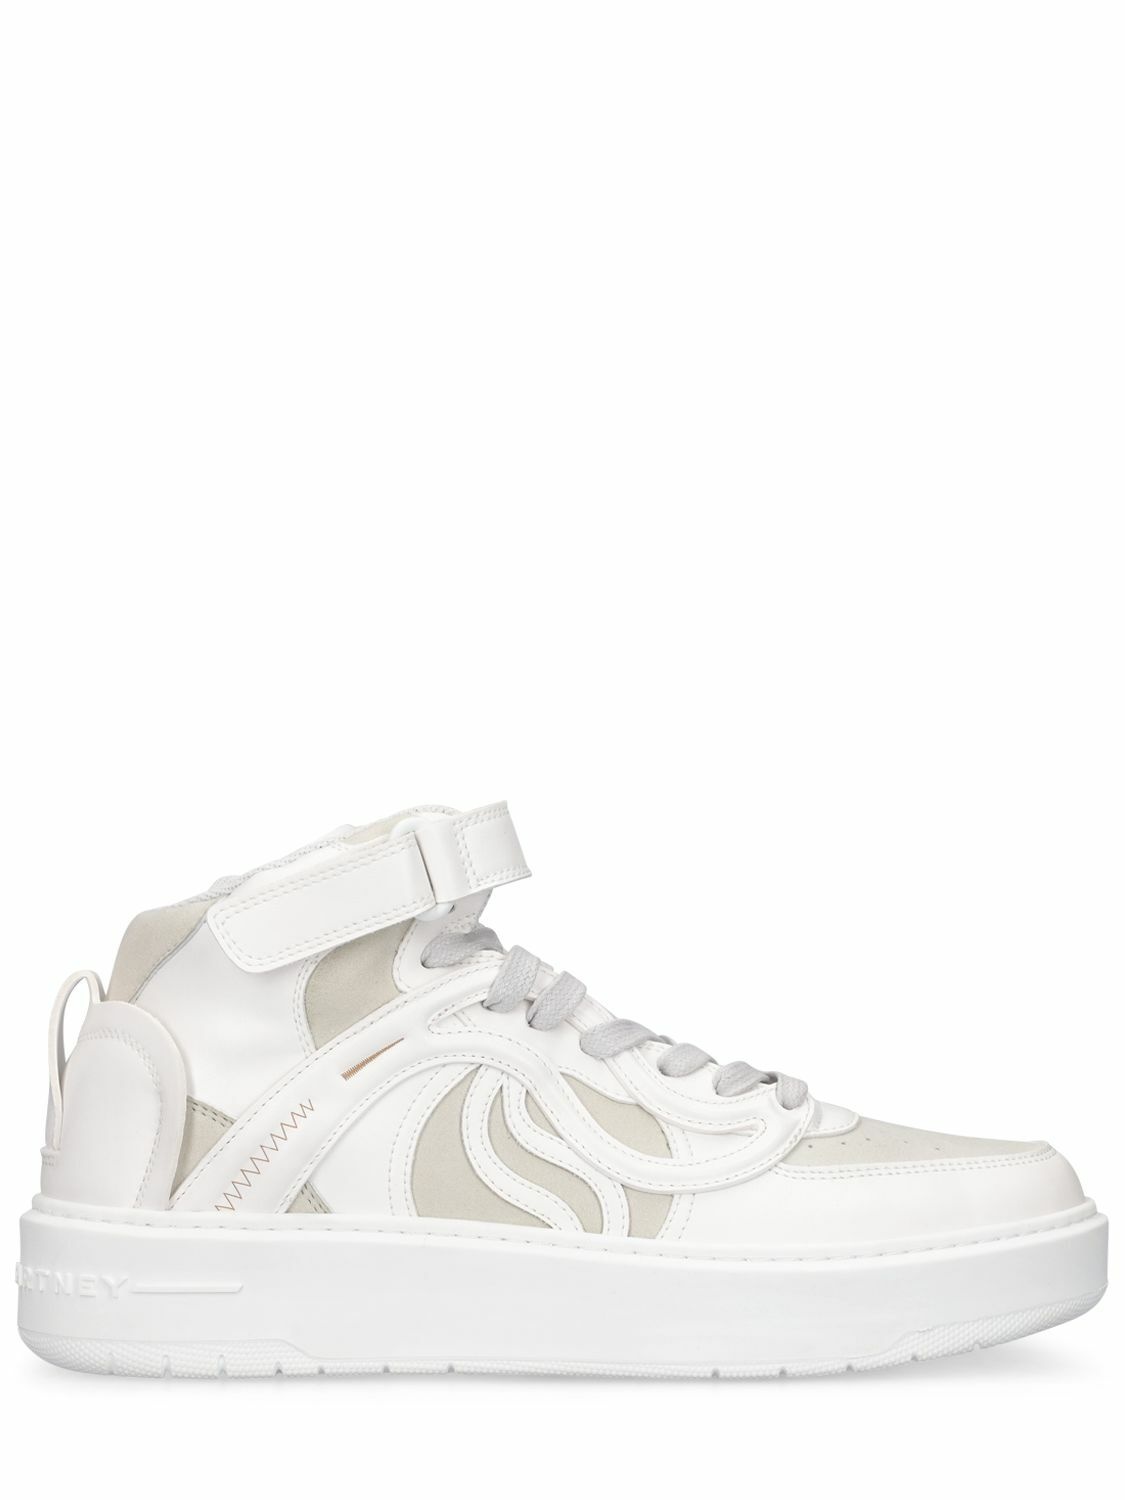 Photo: STELLA MCCARTNEY - S-wave 2 Recycled Polyester Sneakers